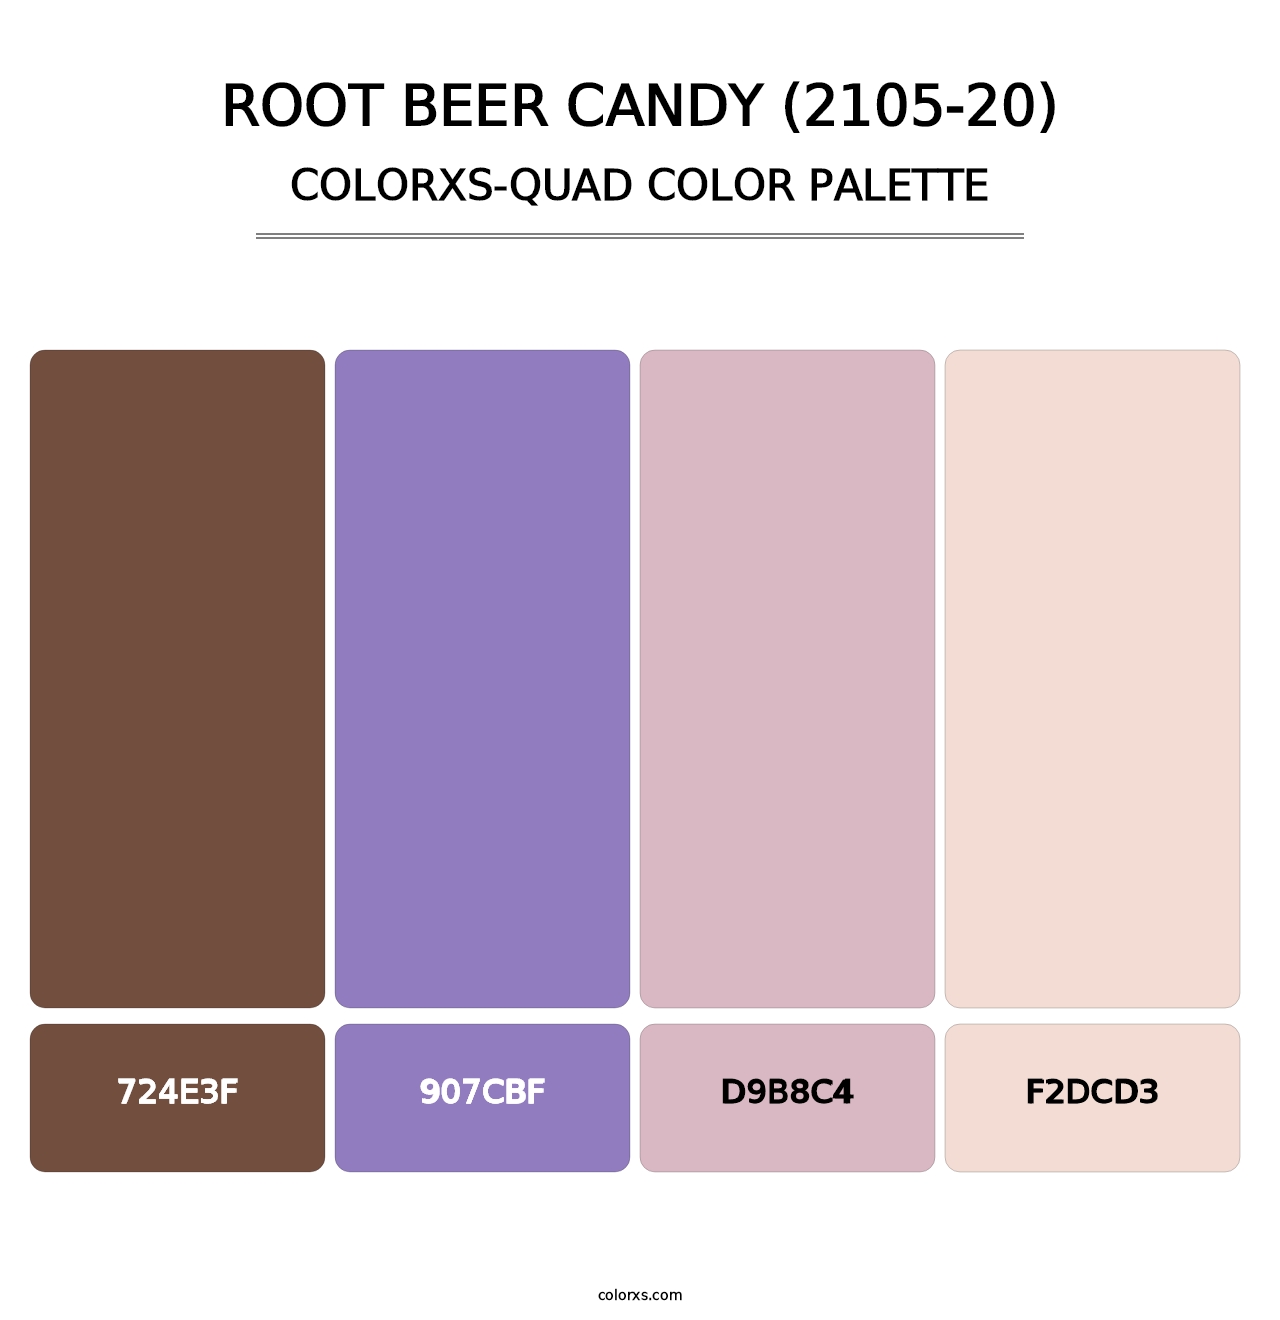 Root Beer Candy (2105-20) - Colorxs Quad Palette